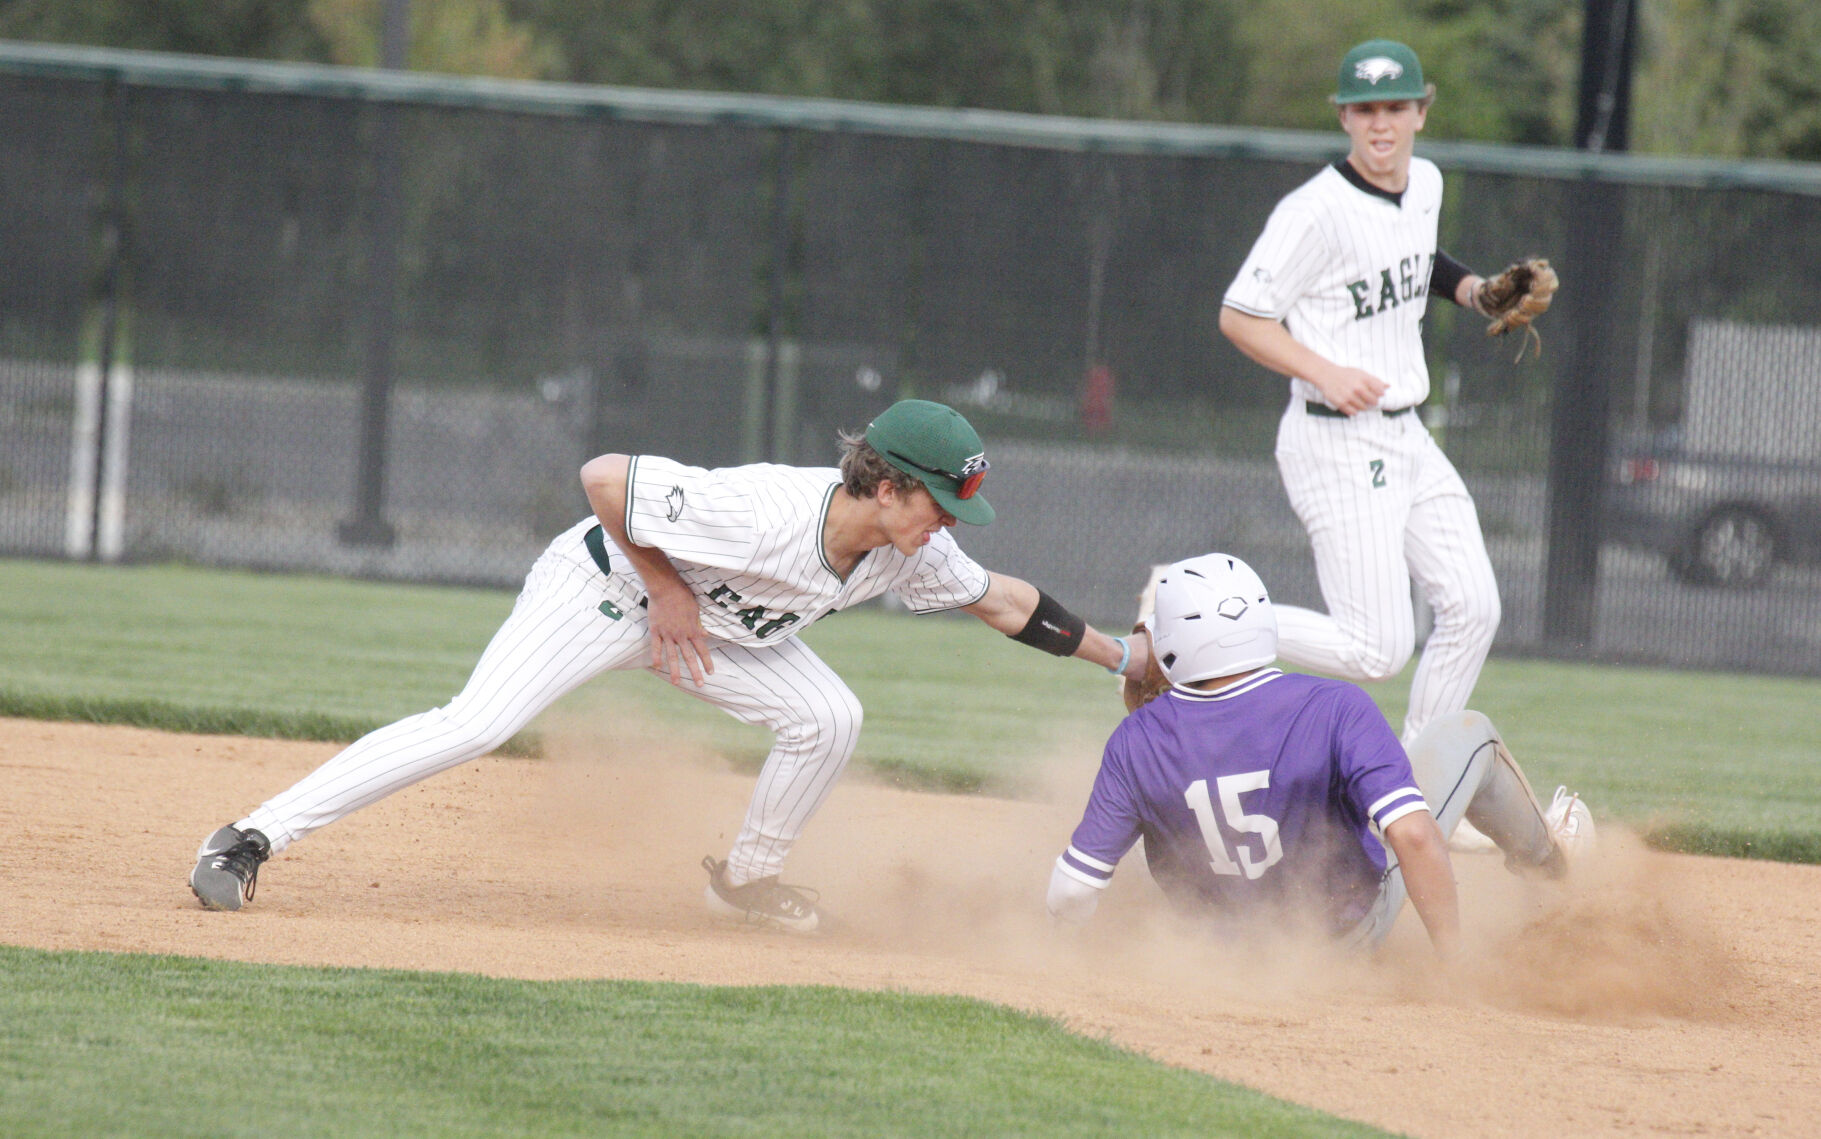 Zionsville Baseball Dominates Bulldogs with Stellar Pitching and Strong Batting Performance